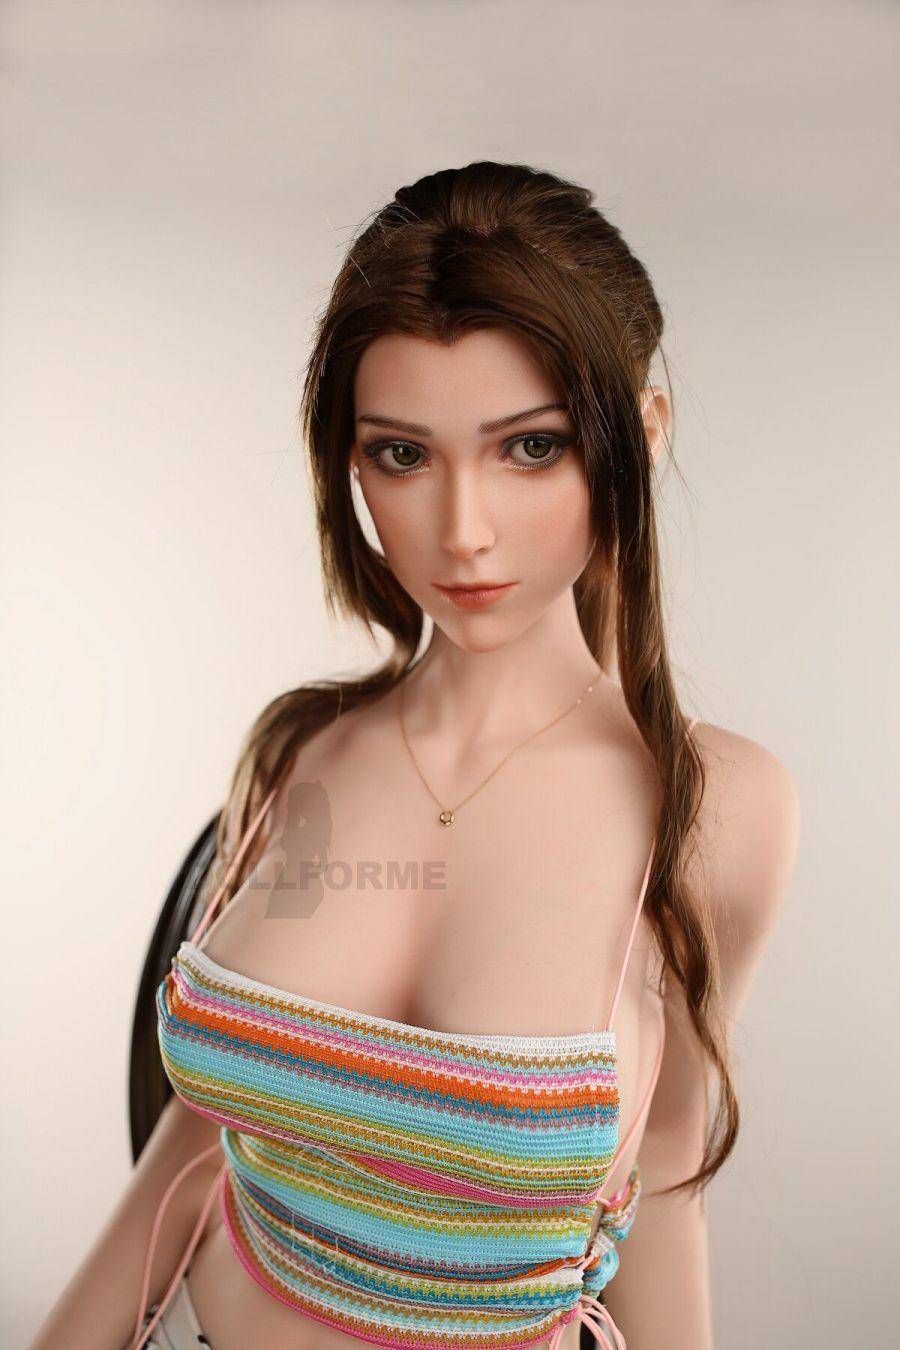 JX Doll | US In Stock - 170cm (5' 7") D-cup Sex Doll wth Silicone Head - Alice